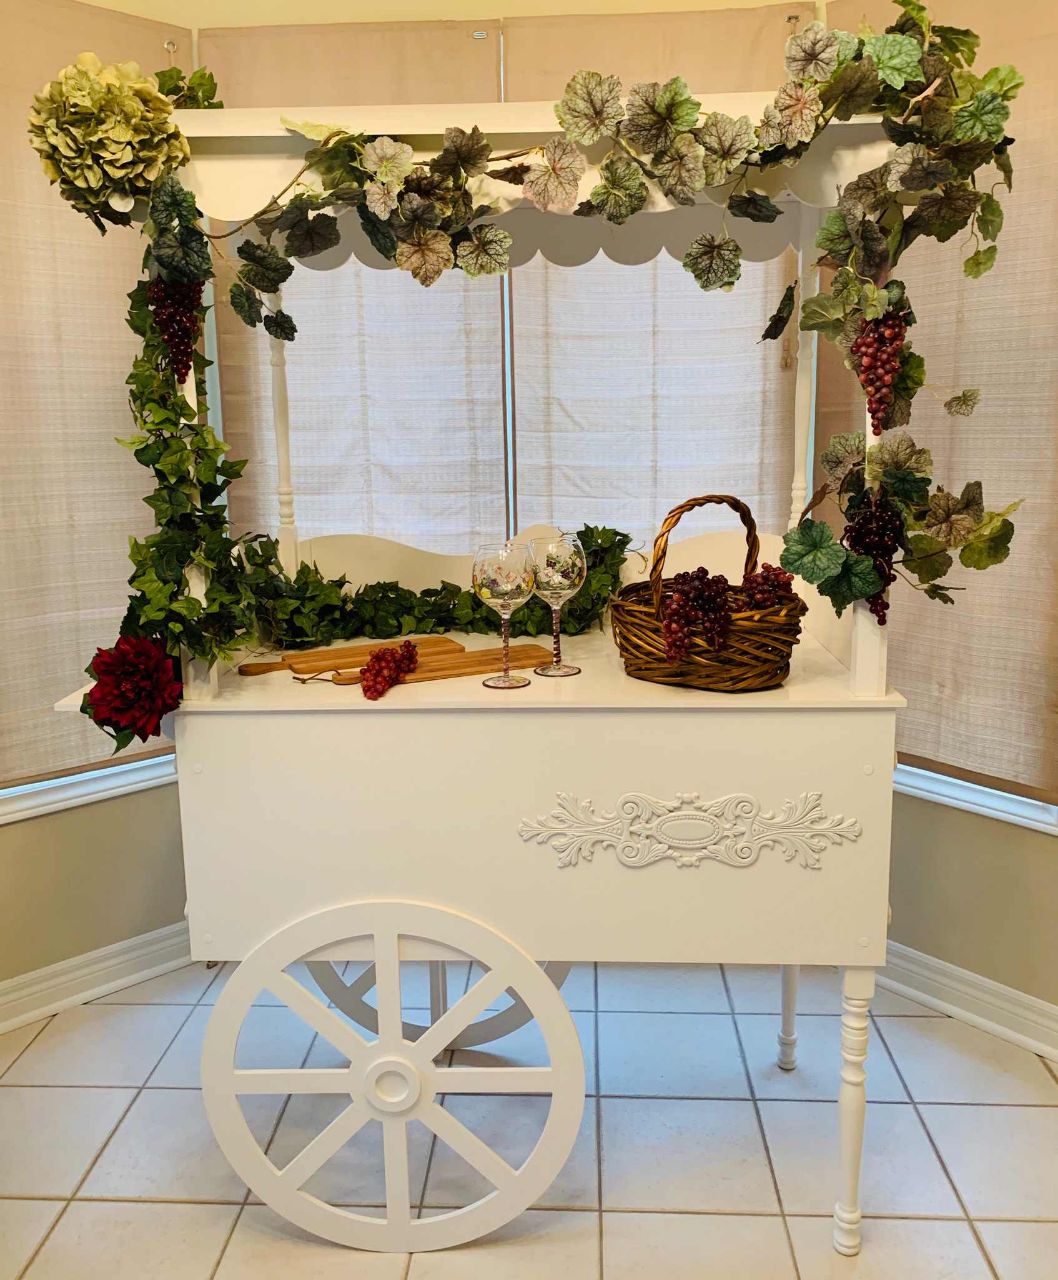 vendor cart, Event Planning Candy Cart,  Birthday Decorations, Collapsible Wedding Sweet Candy Cart, Candy Cart On Wheels for sale, Simple column Candy Cart,Mini Candy Cart, Party Decoration, Candy Bar Cart, Dessert Stand, Display Cart, PVC Cart